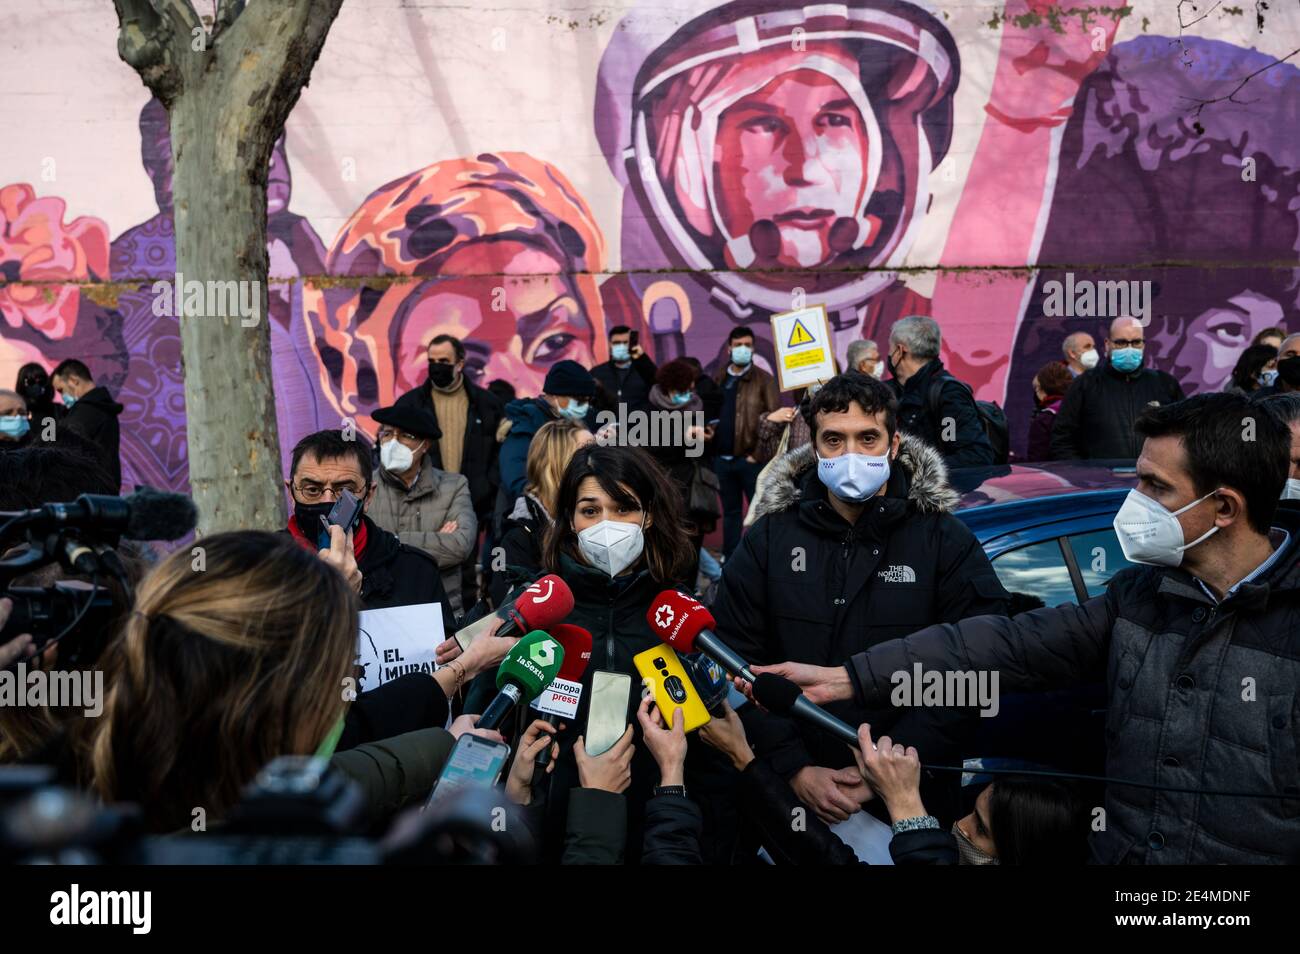 Madrid, Spain. 24th Jan, 2021. Isabel Serra, member of Podemos party speaks to the press during a protest against the removal proposed by far-right party VOX of a feminist mural named 'Union makes force'. In the mural appear the faces of 15 women who are part of history for their fight in favor of equality: Angela Davis, Frida Kahlo, Nina Simone, Rigoberta Menchu, Lucia Sanchez Saornil, Rosa Arauzo, Valentina Tereshkova, Chimamanda Ngozi, Emma Goldman, Kanno Sugato, Liudmila Pavlichenko, Billy Jean King, Gata Cattana, Rosa Parks, and Comandanta Ramona. Credit: Marcos del Mazo/Alamy Live News Stock Photo